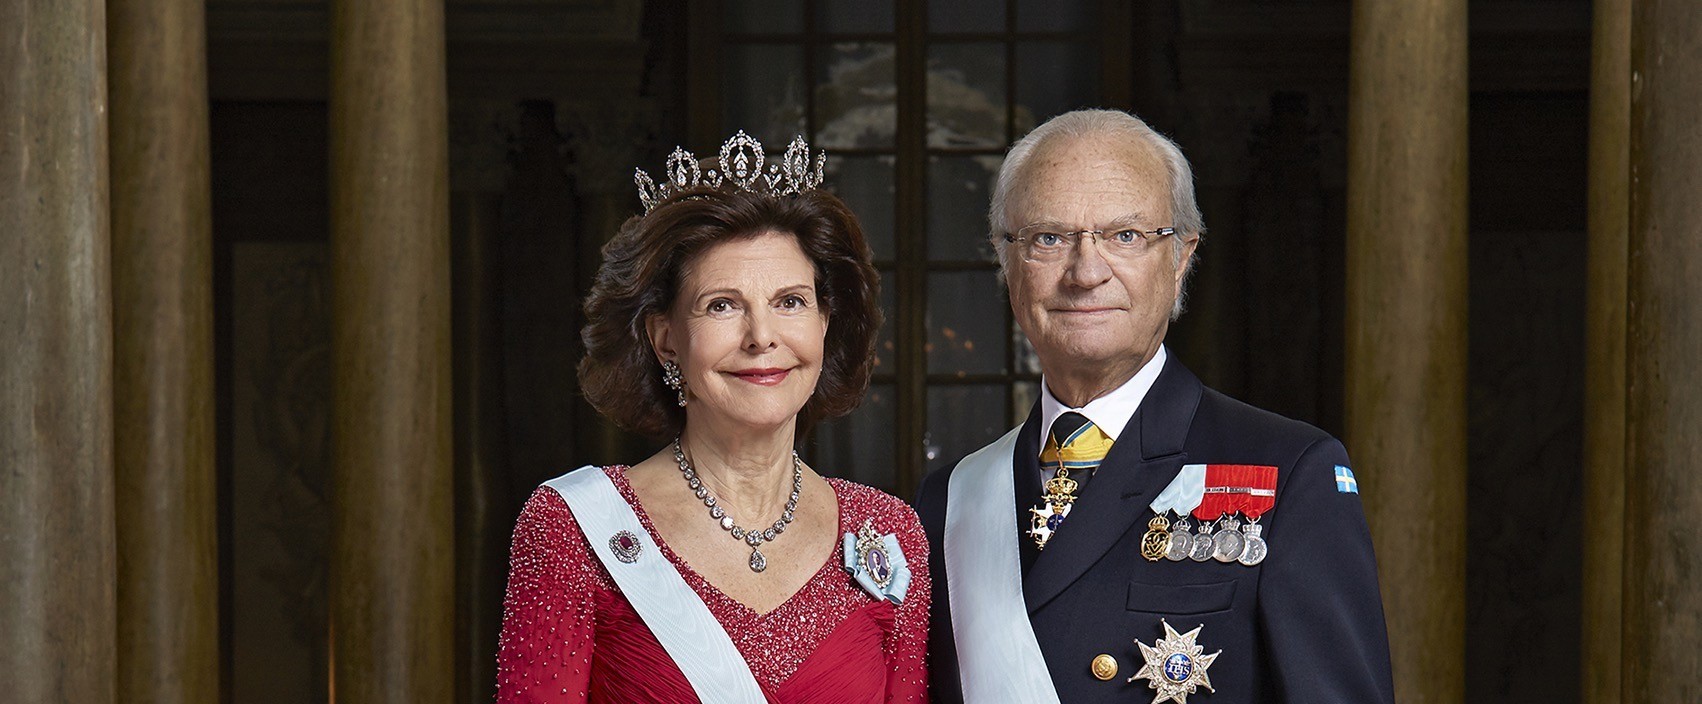 Their Majesties the King and Queen of Sweden